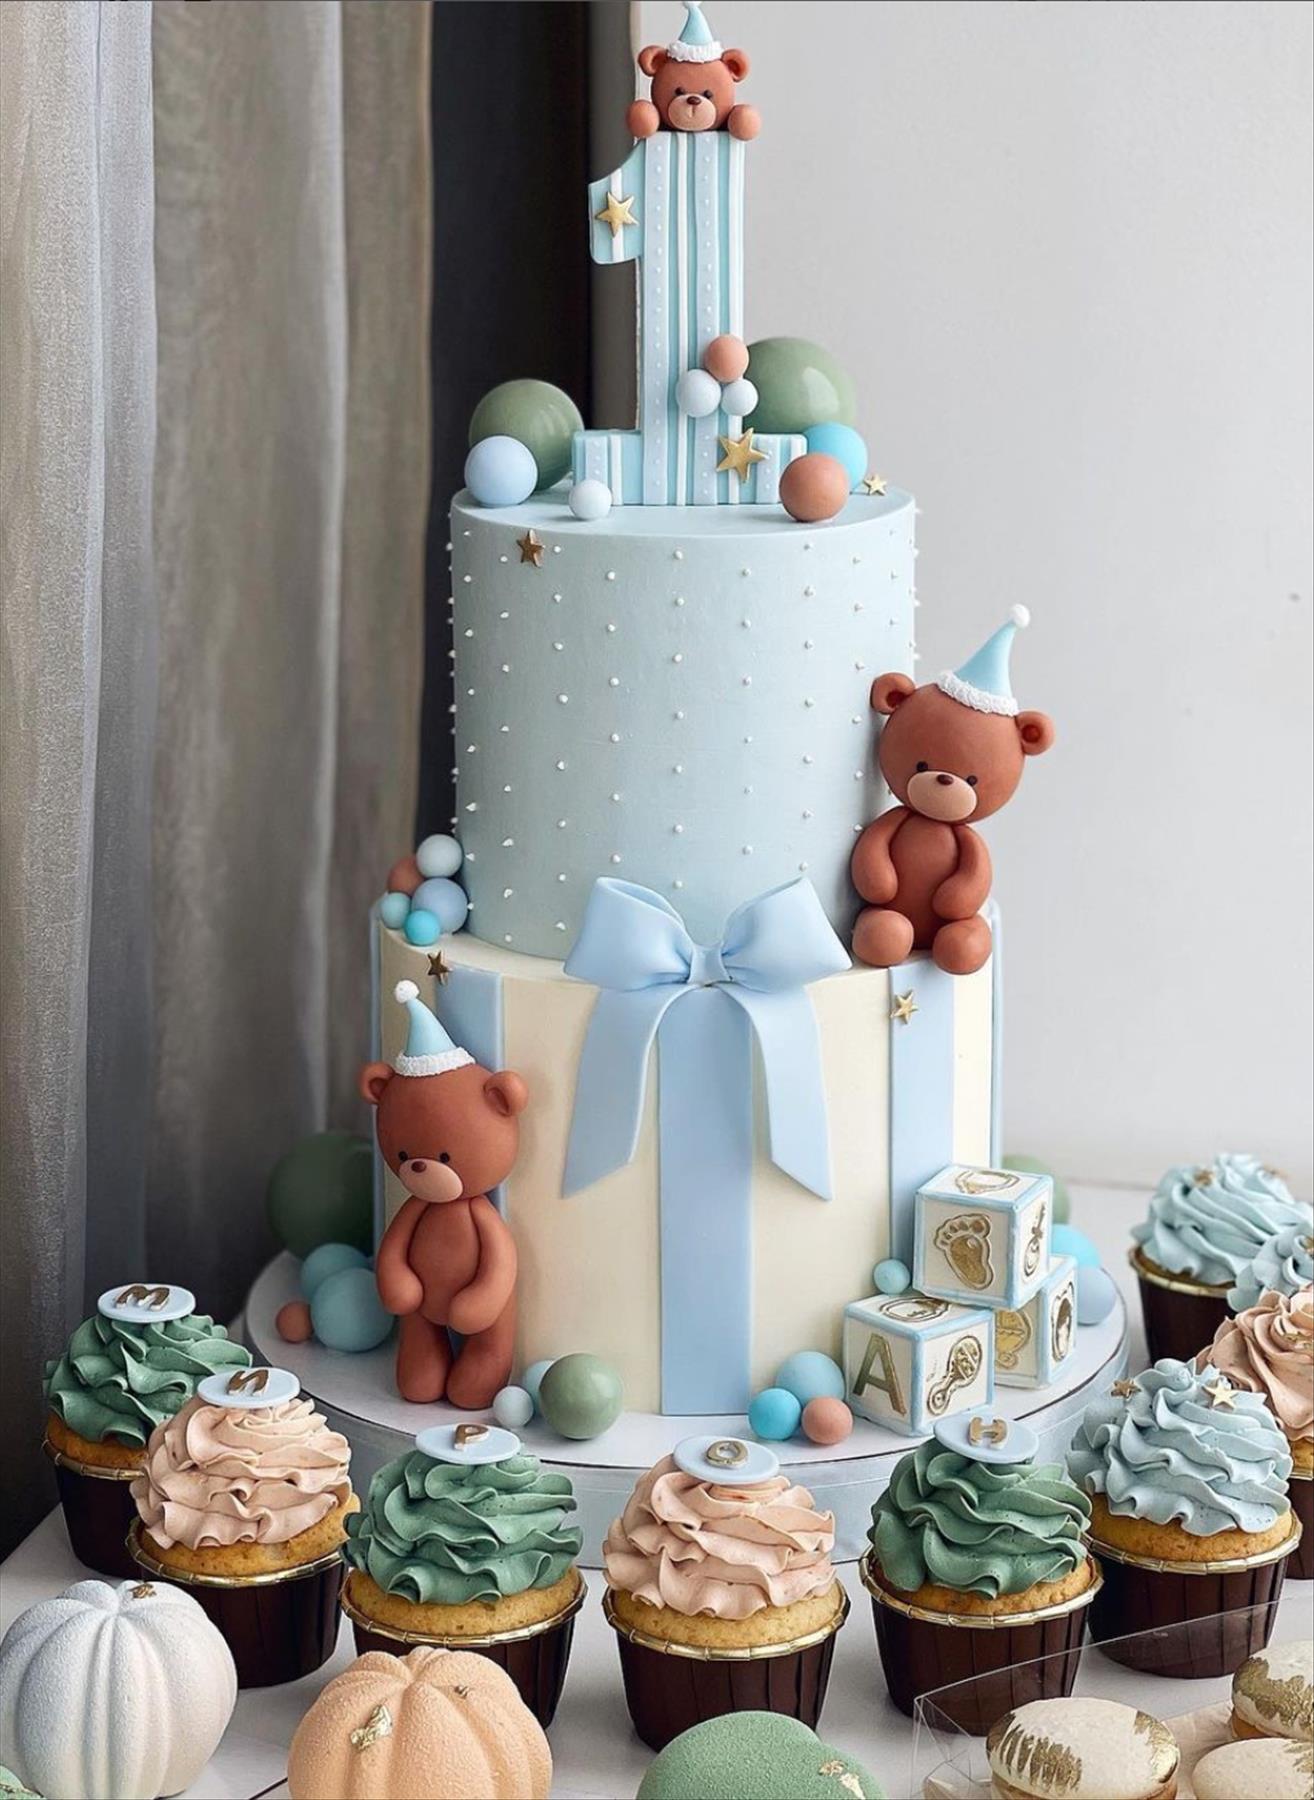 Sweet Wedding Cake Trends 2022 You Want to Steal